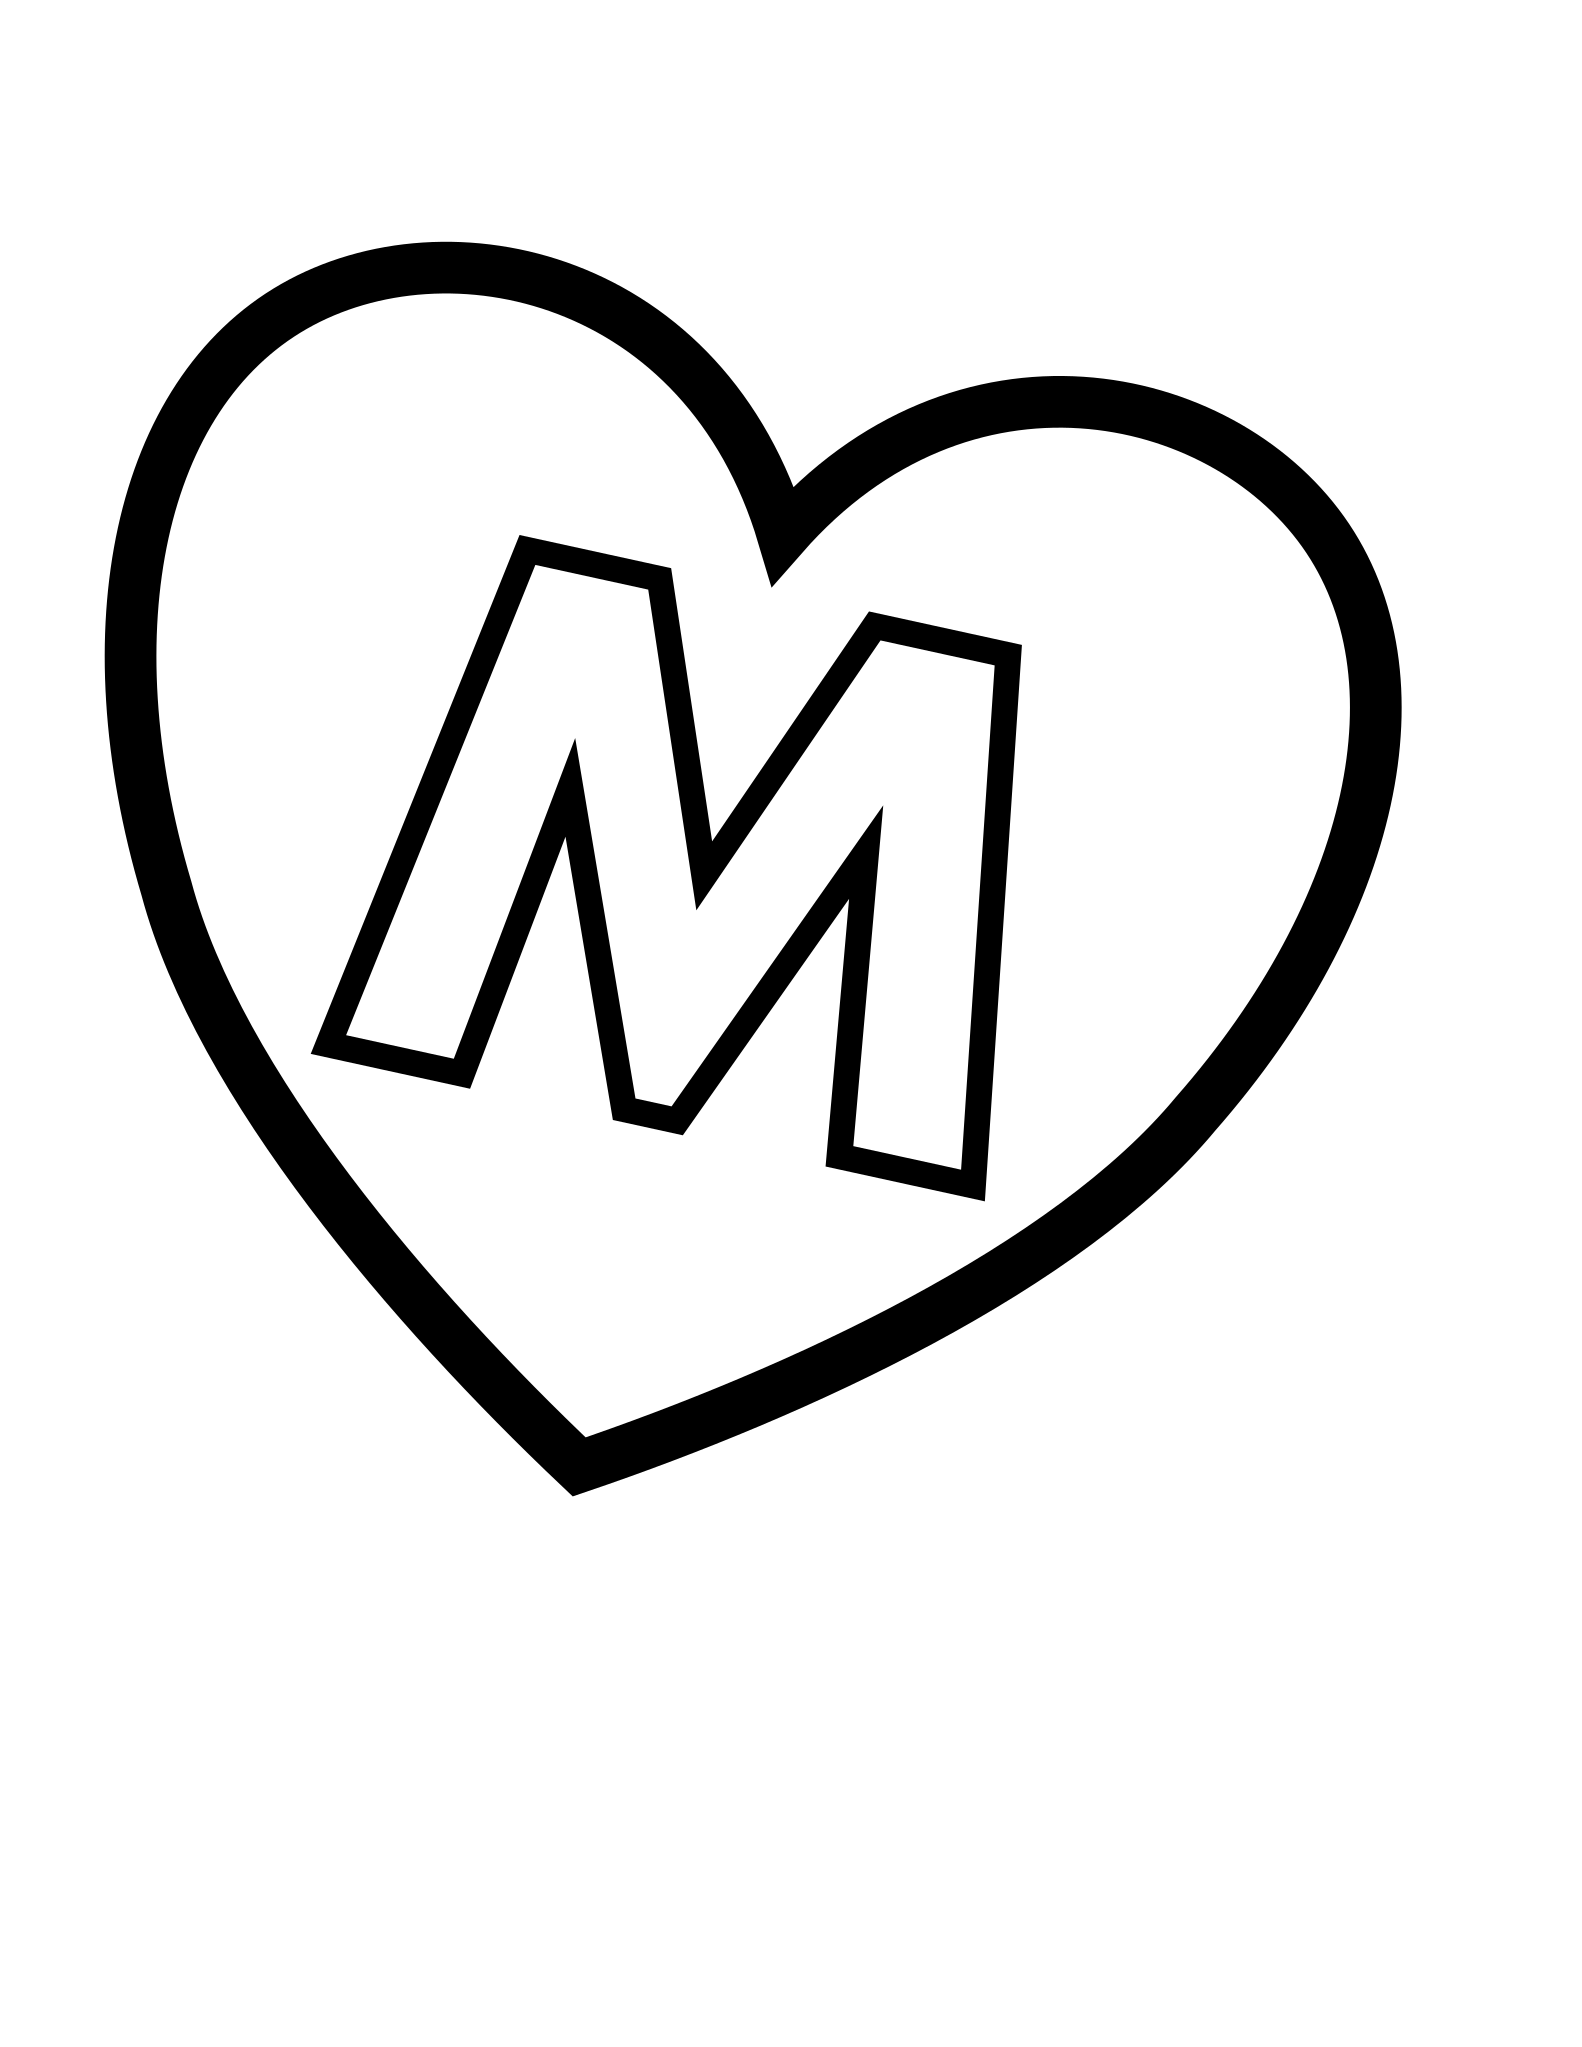 File:Valentines-Day-Hearts-M-Alphabet-At-Coloring-Pages-For-Kids-Boys-Dotcom.Svg  - Wikimedia Commons